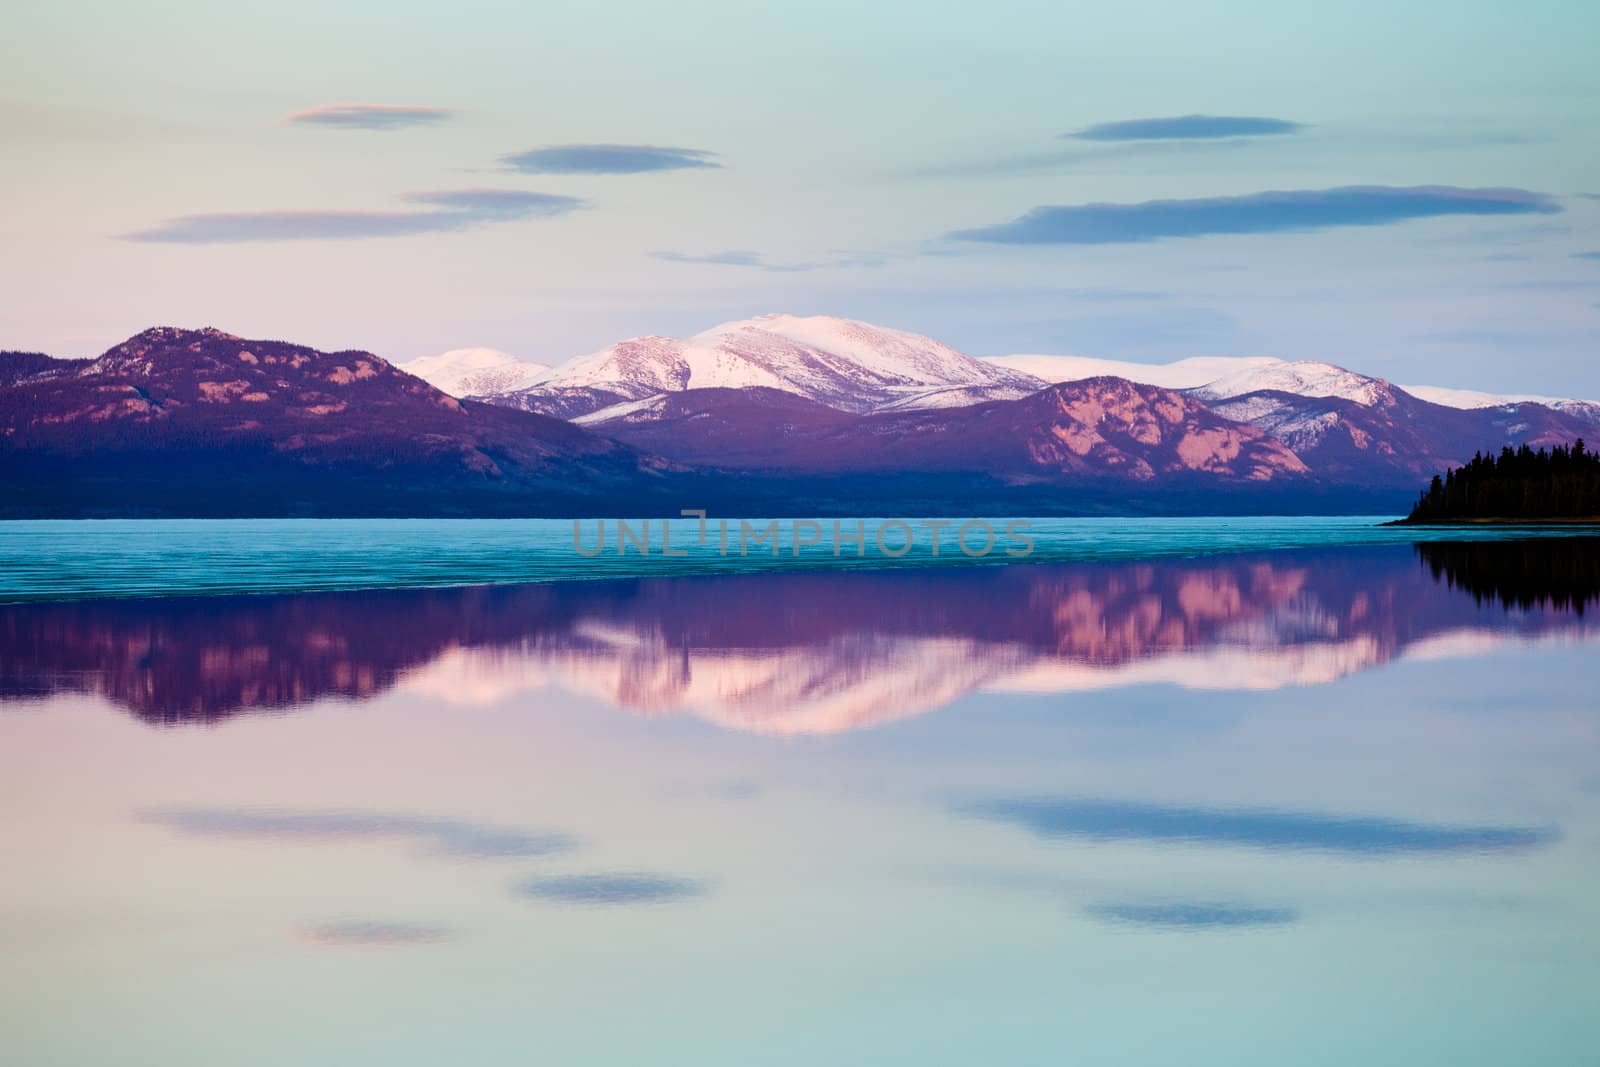 The evening before ice-break at Lake Laberge, Yukon Territory, Canada: reflection of snow-covered mountains on calm open water surface of still largely ice-covered lake.